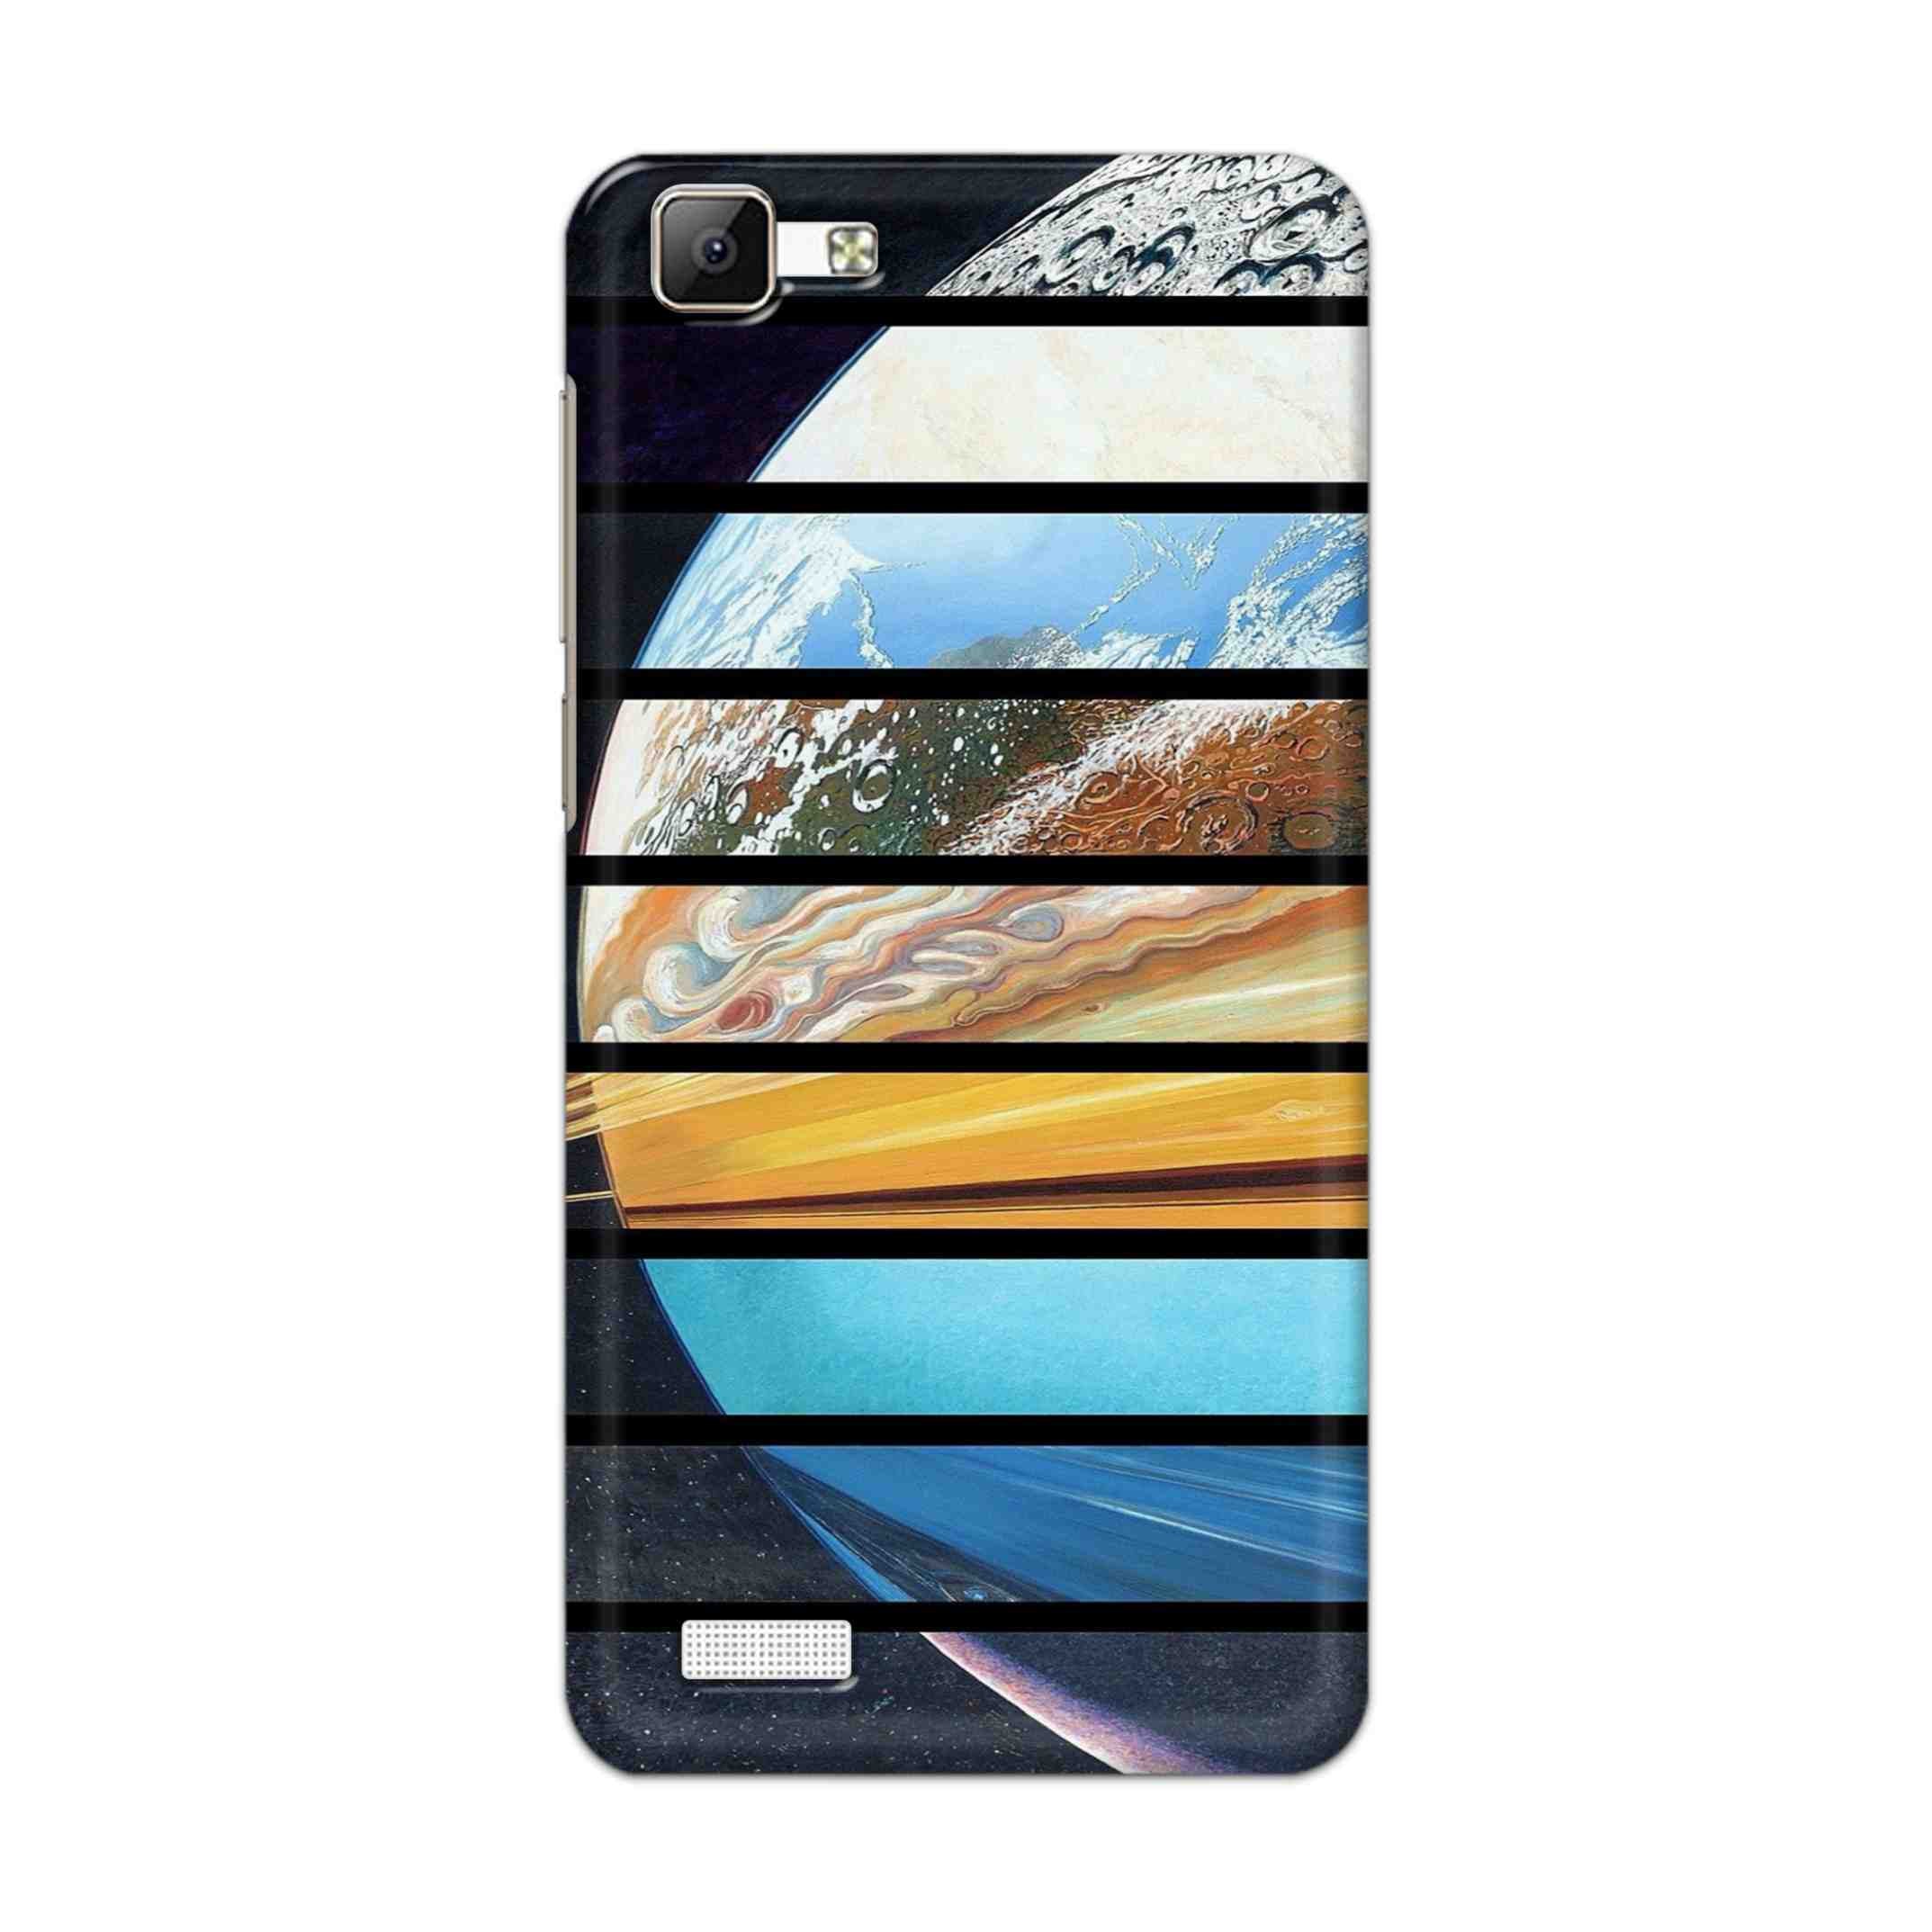 Buy Colourful Earth Hard Back Mobile Phone Case Cover For Vivo Y35 Online